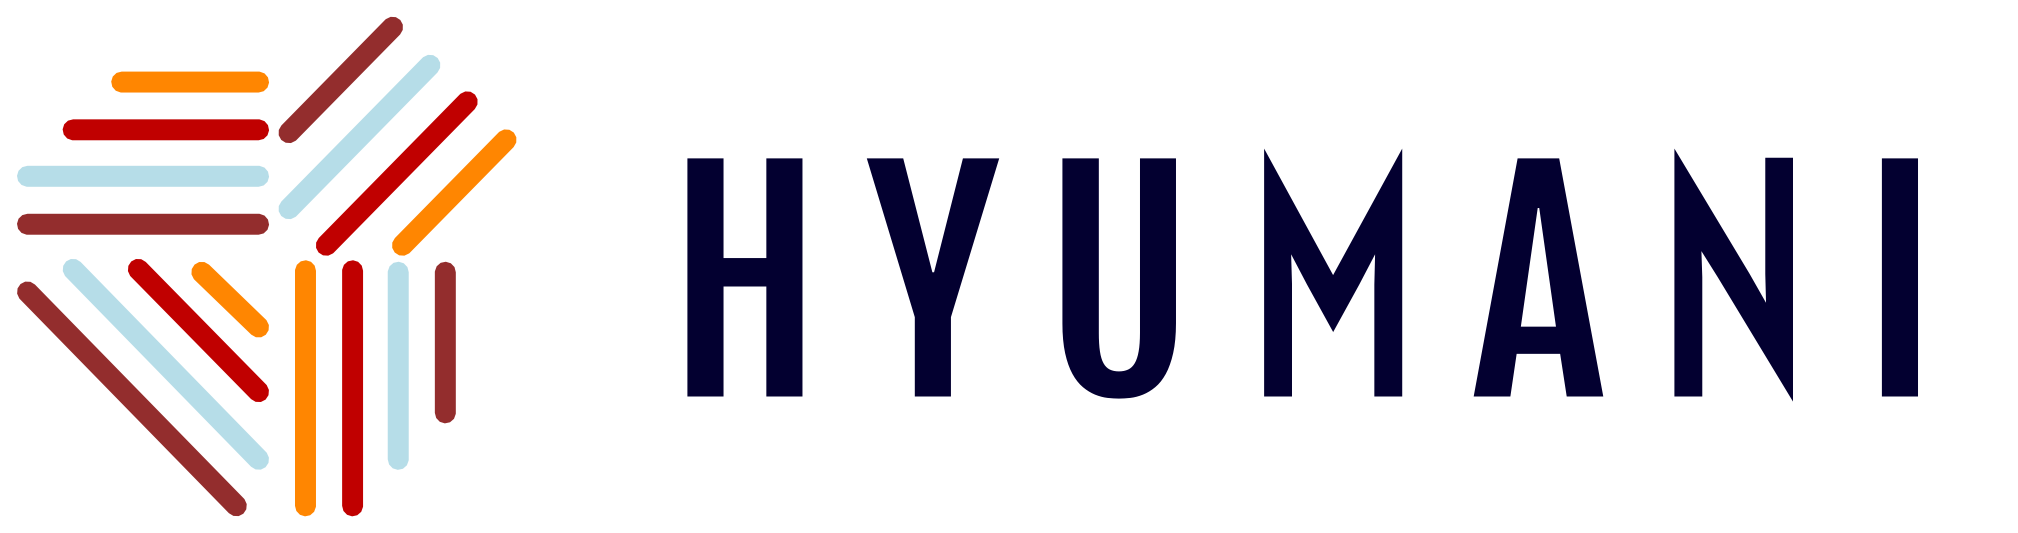 hyumani.com - solution to define soft power and positive characteristic traits for inspiration